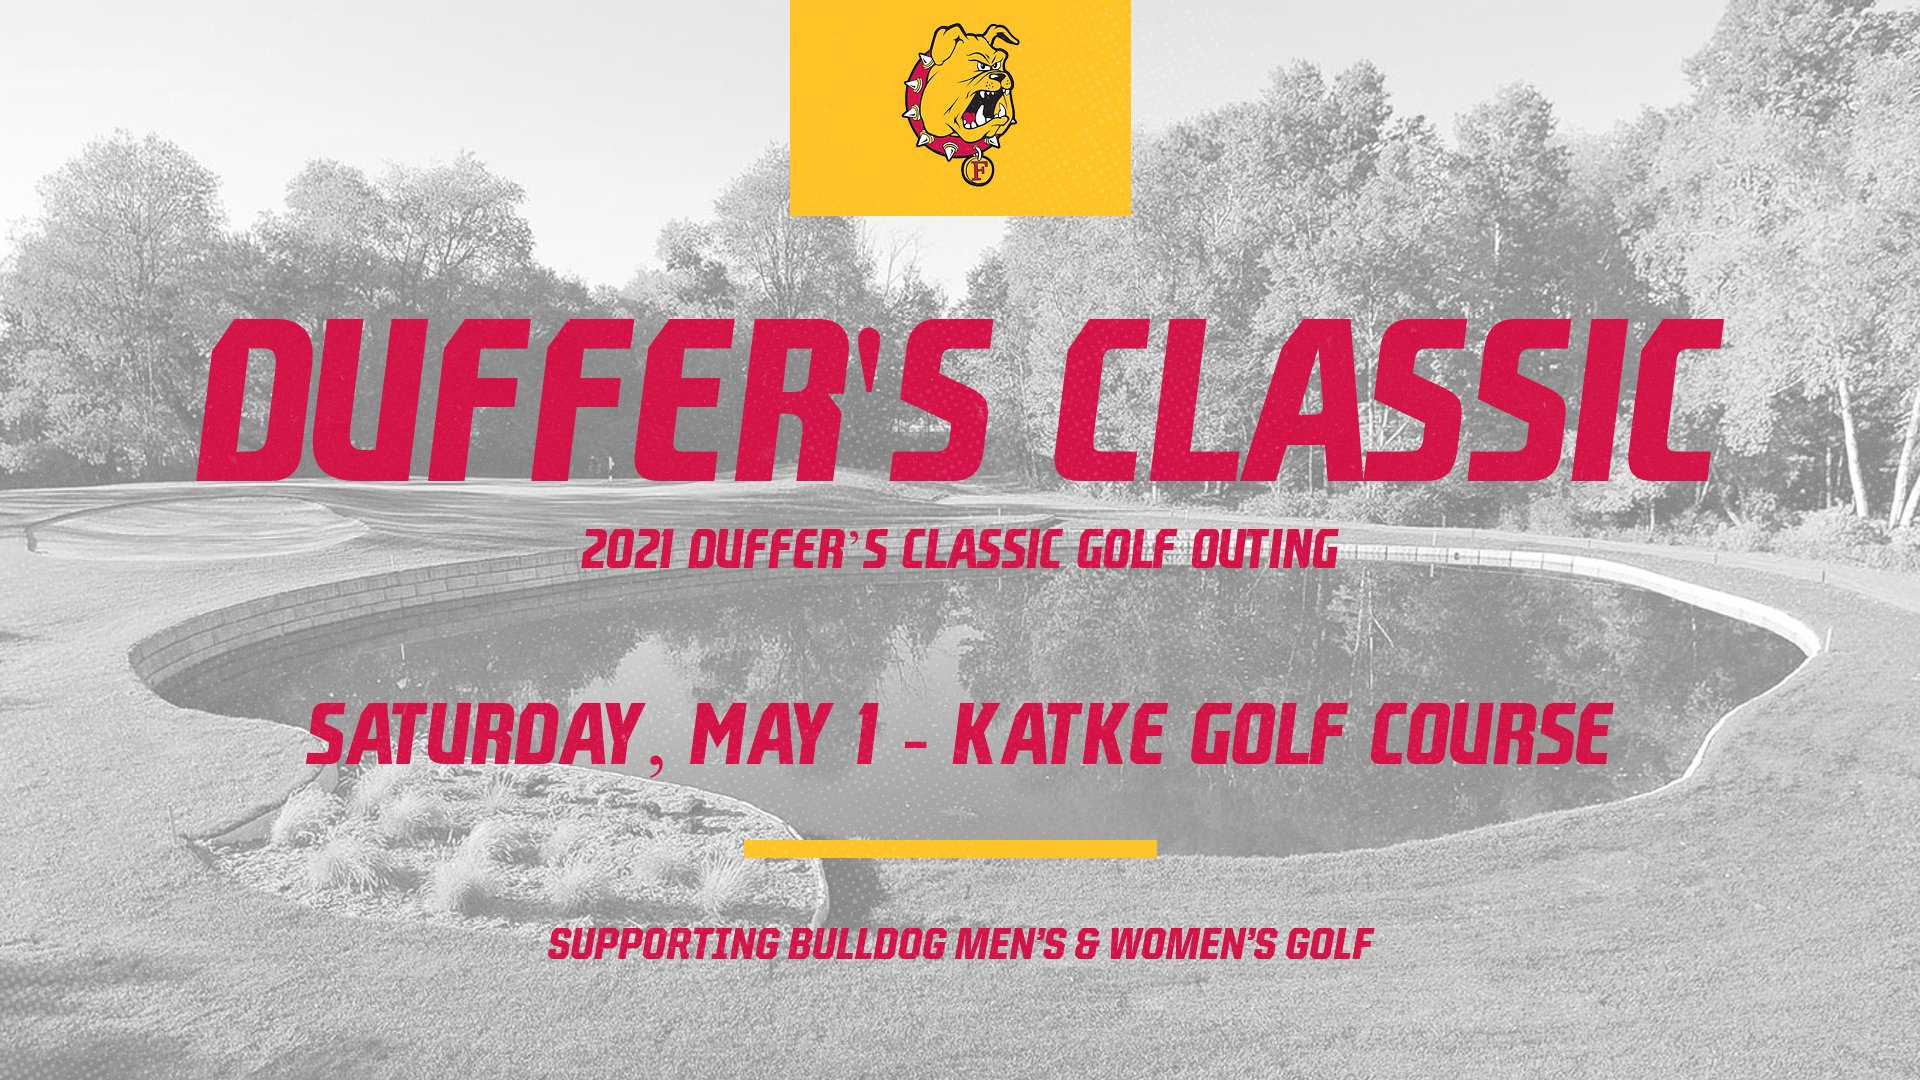 Registration Currently Underway For 2021 Duffer's Classic Supporting Bulldog Golf Programs